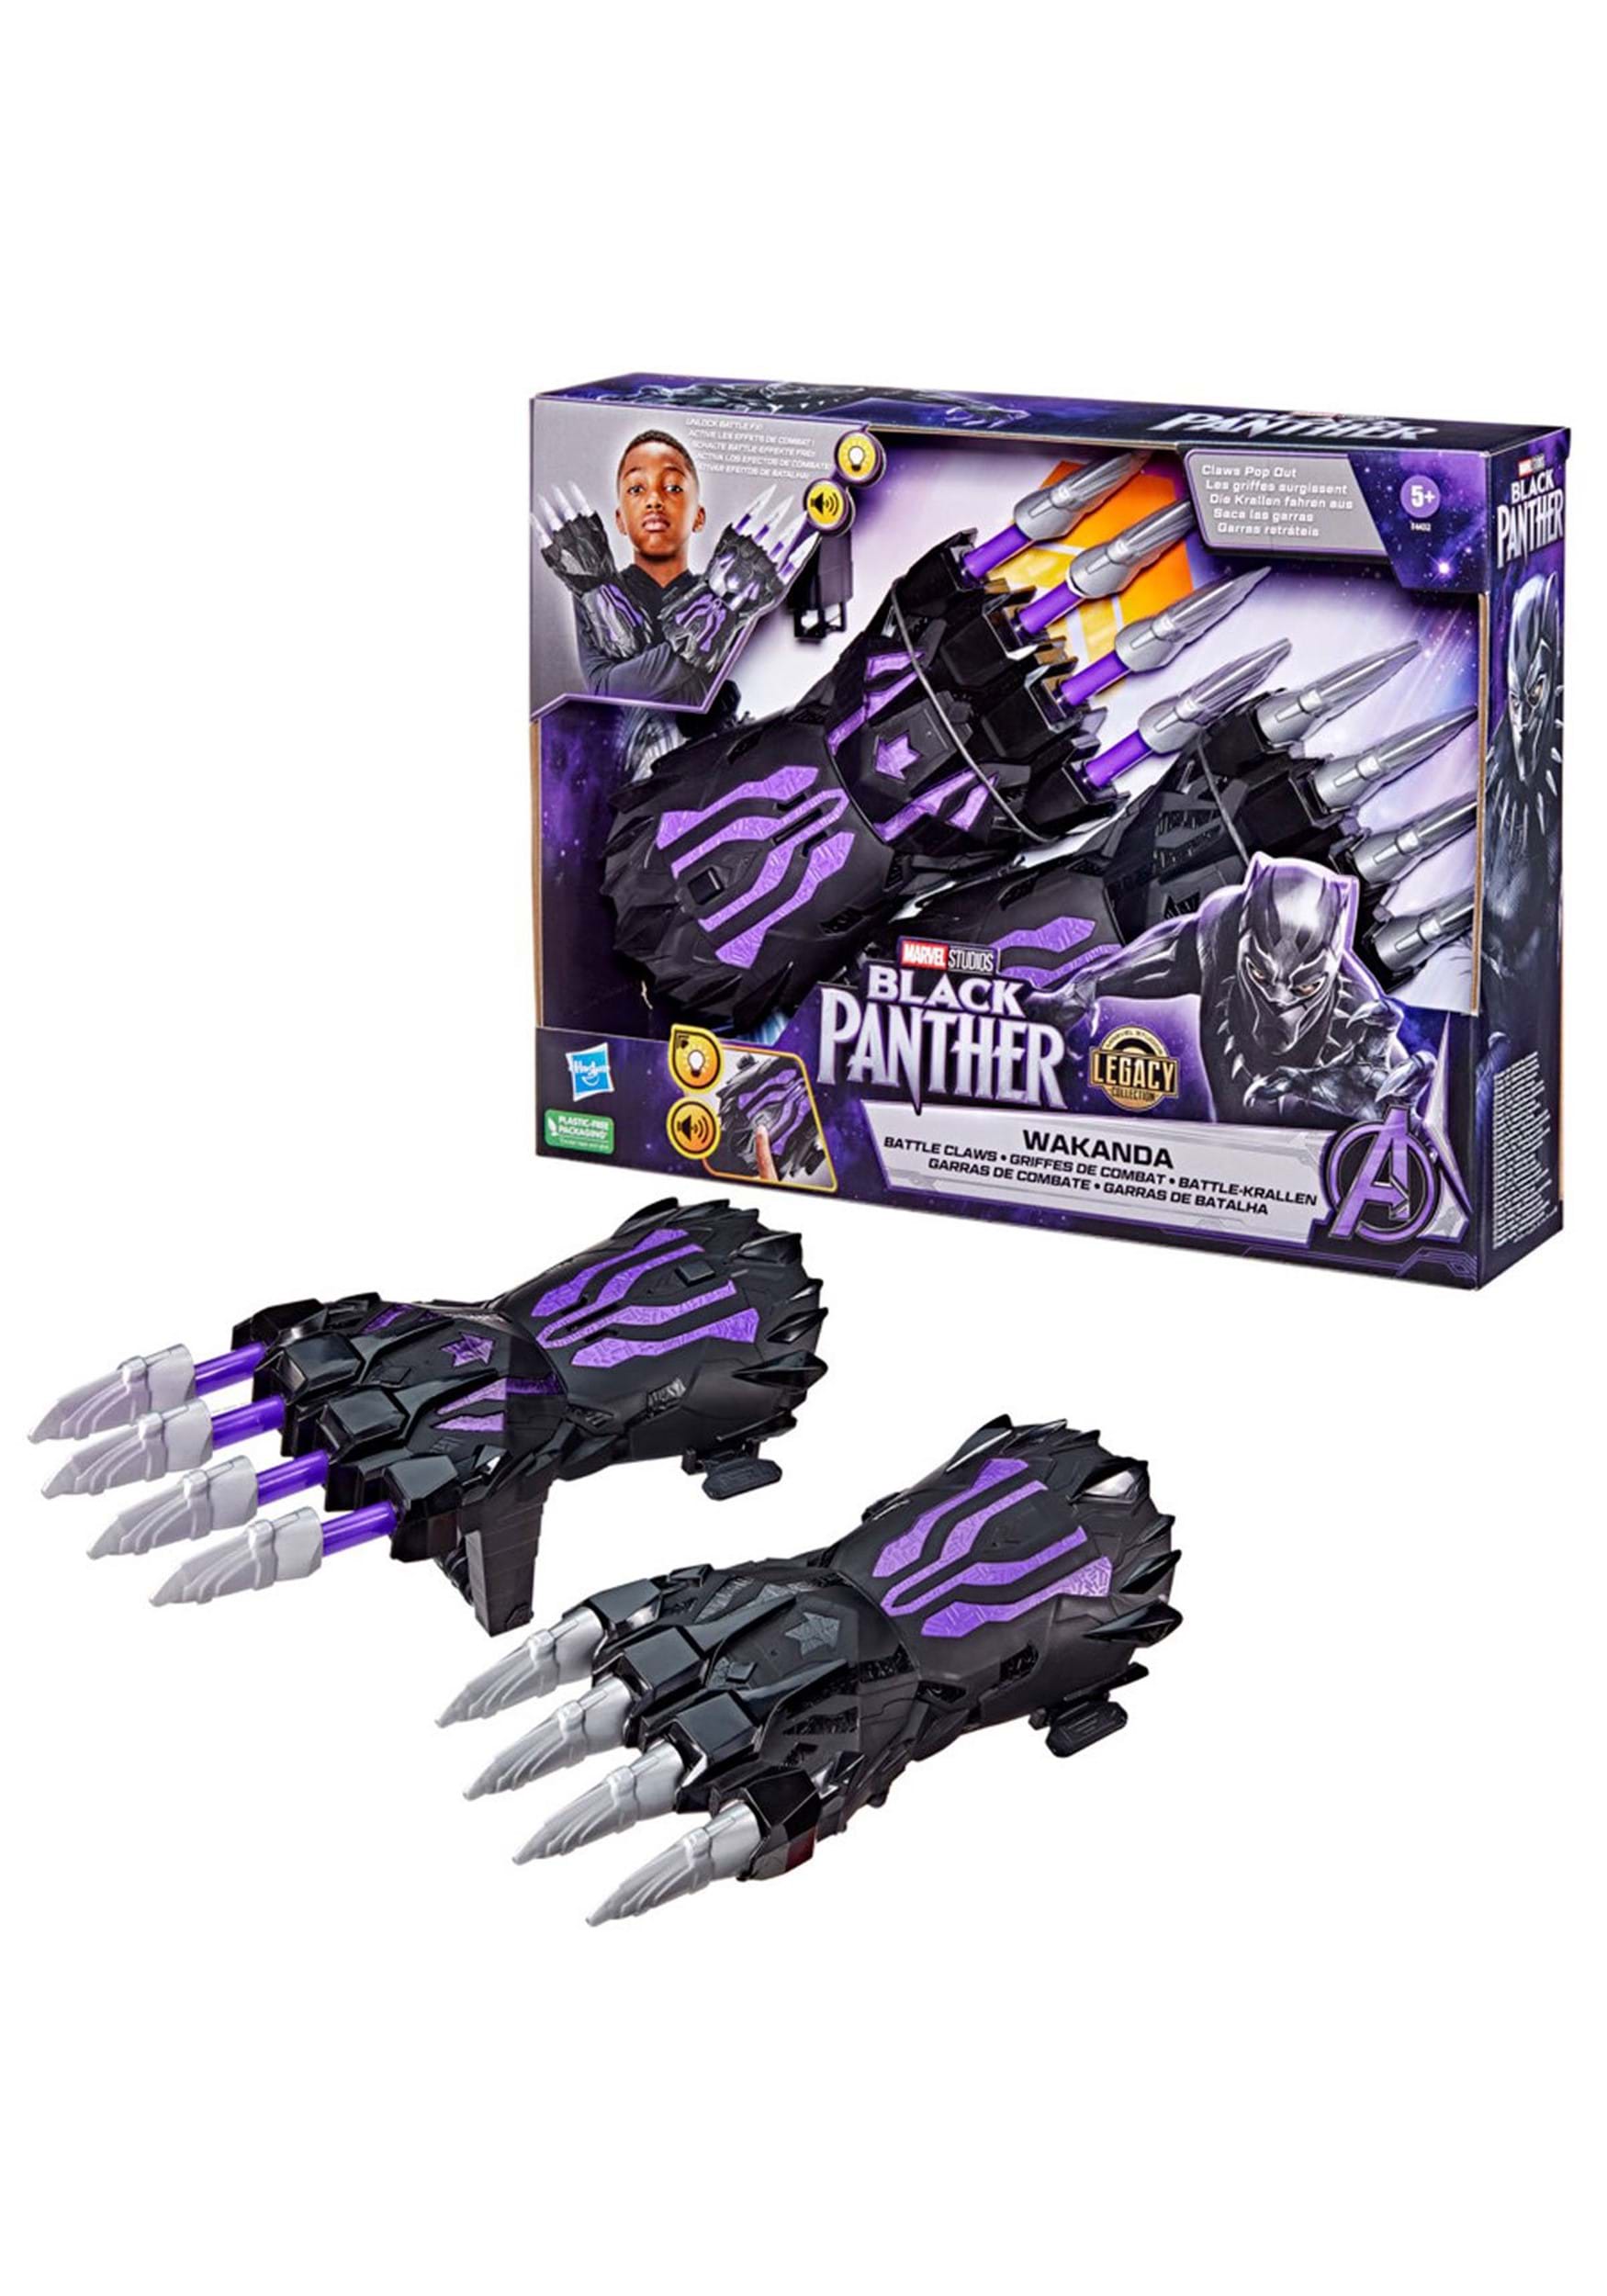 Licensed Black Panther Wakanda Battle Claws